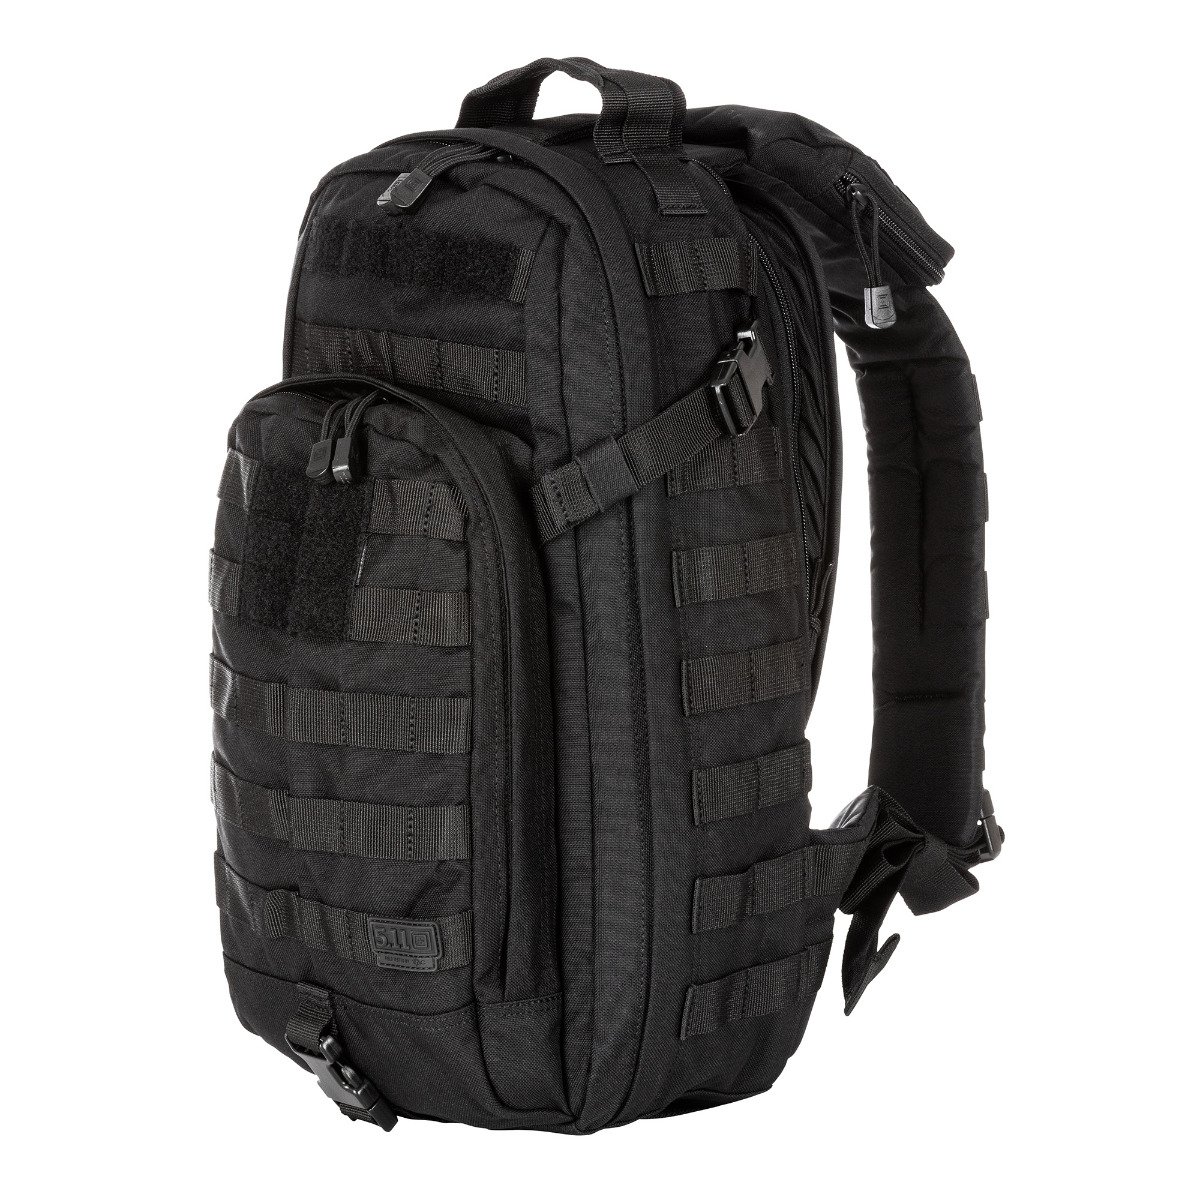 5.11 Work Gear Rush MOAB 10 Pack, Water-Resistant, Customizable Bag, Black, 1 SZ, Style 56964 - image 1 of 6